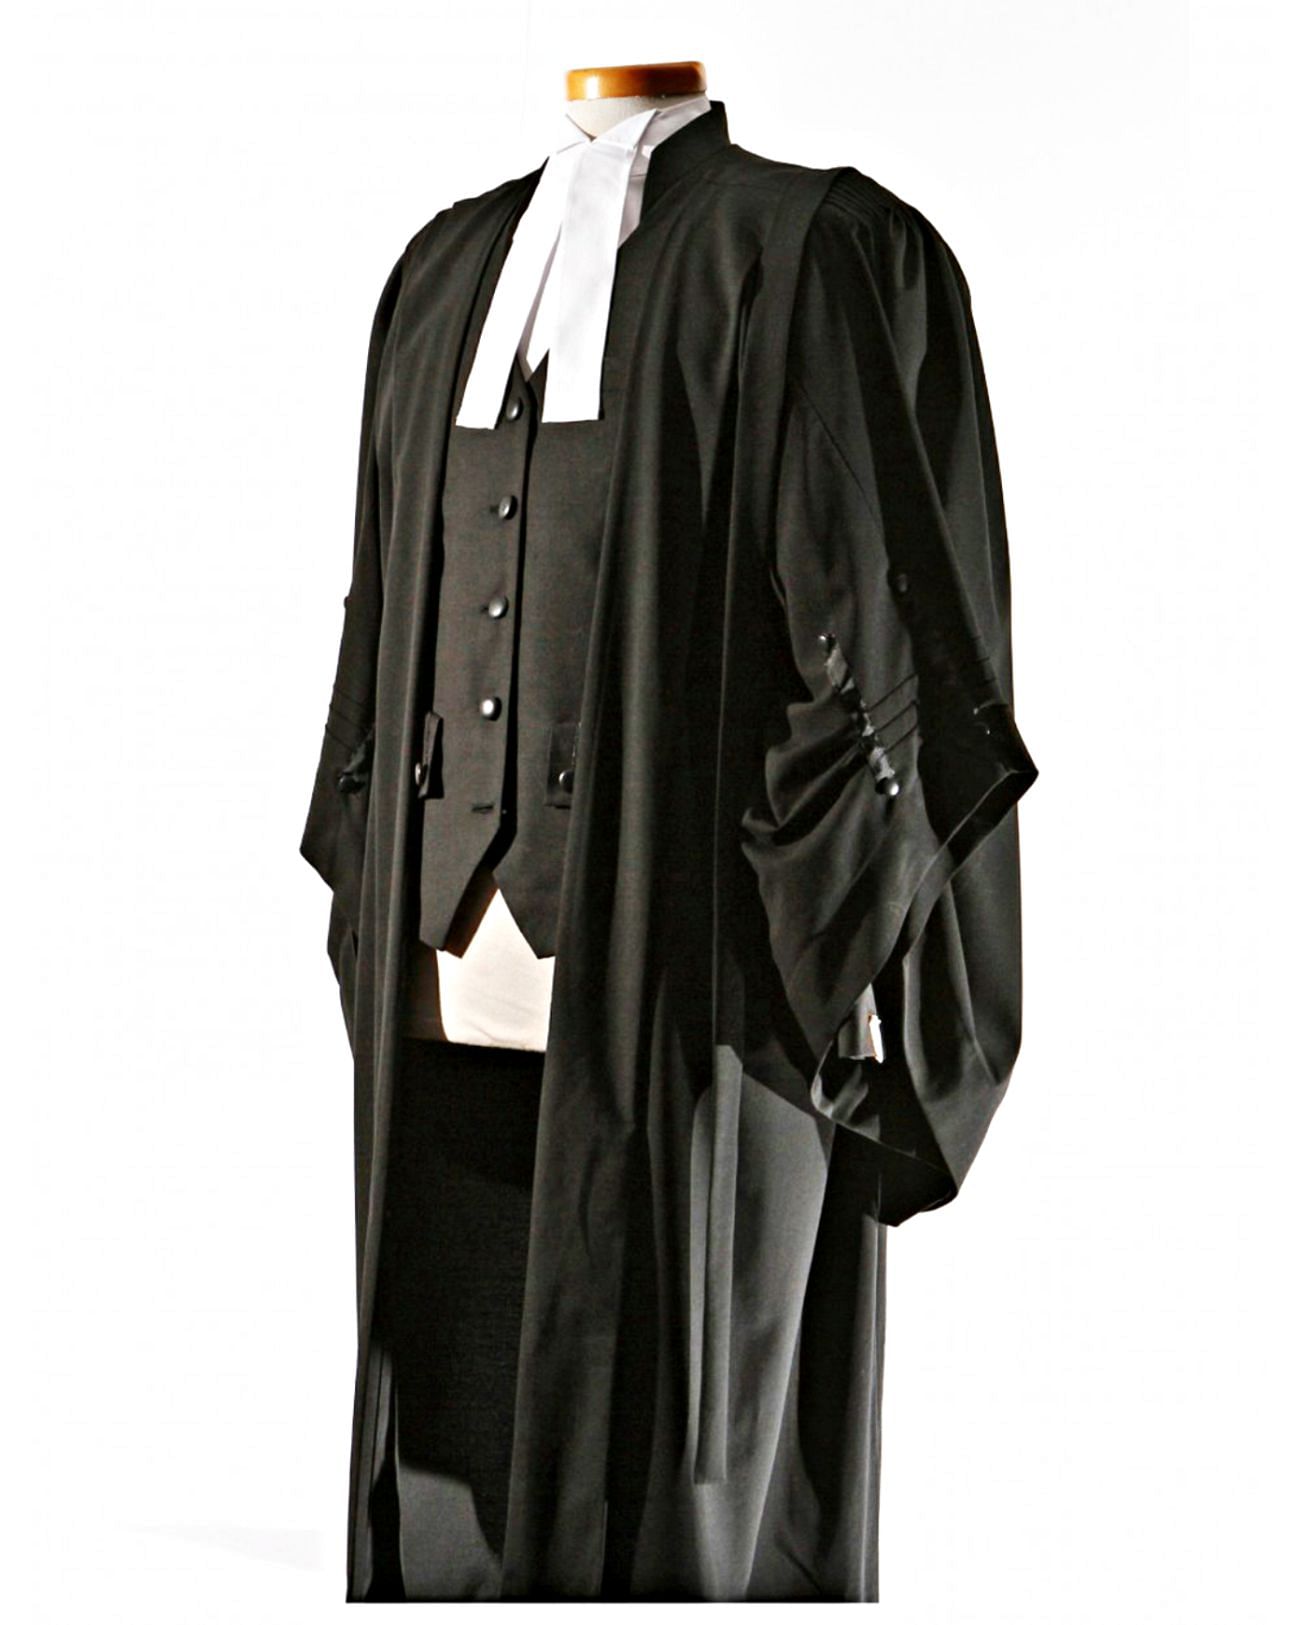 LawBeat - The Bar Council of India has the power to make rules to prescribe dress  codes for lawyers to appear before Supreme Court, High Court and tribunals.  Read more -  https://lawbeat.in/news-updates/bombay-high-court-adjourns-case-after- advocate ...